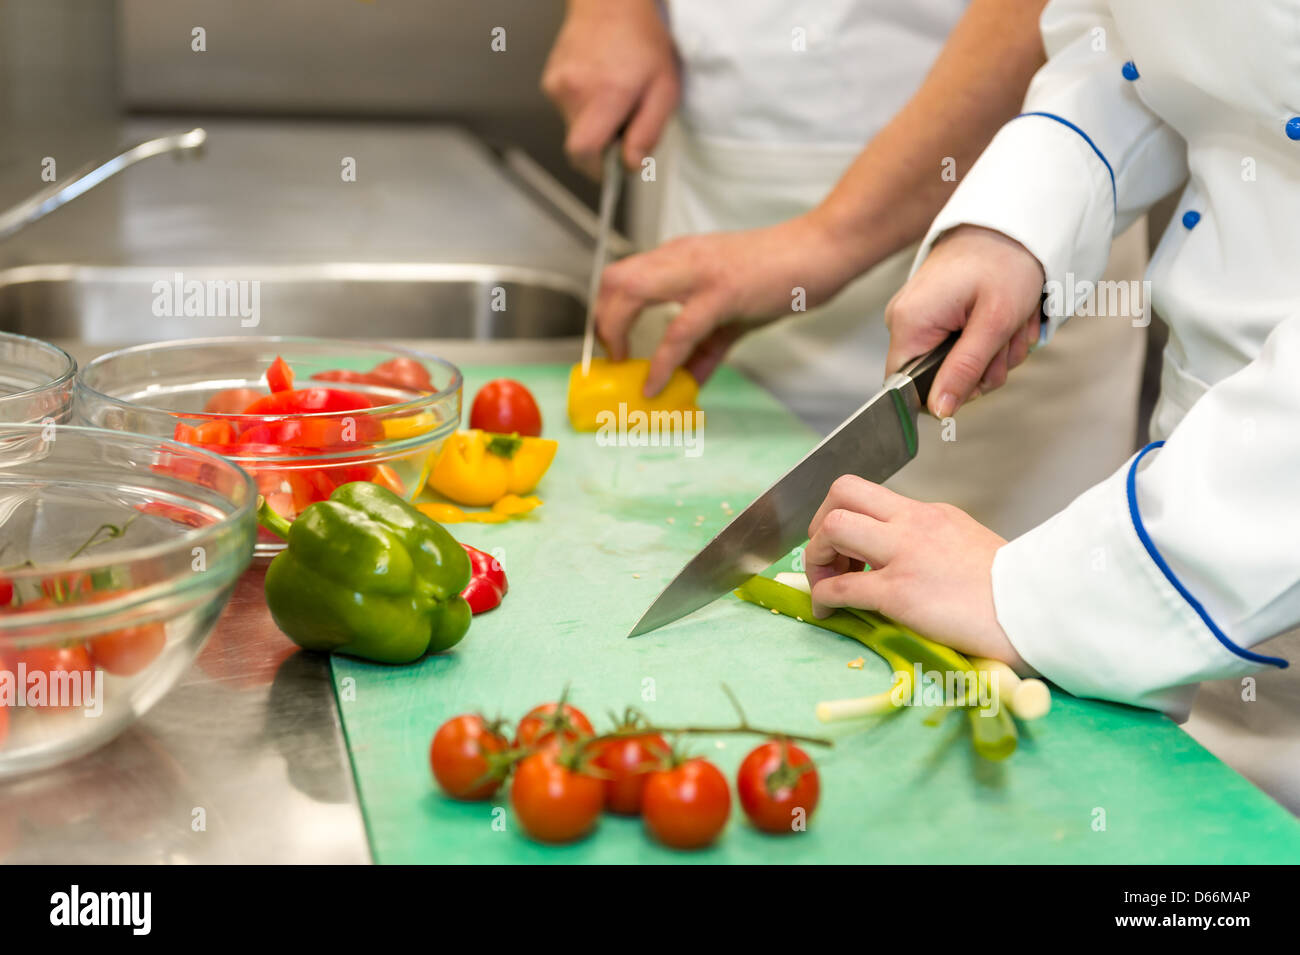 https://c8.alamy.com/comp/D66MAP/close-up-of-chefs-cutting-vegetables-in-hotels-kitchen-D66MAP.jpg